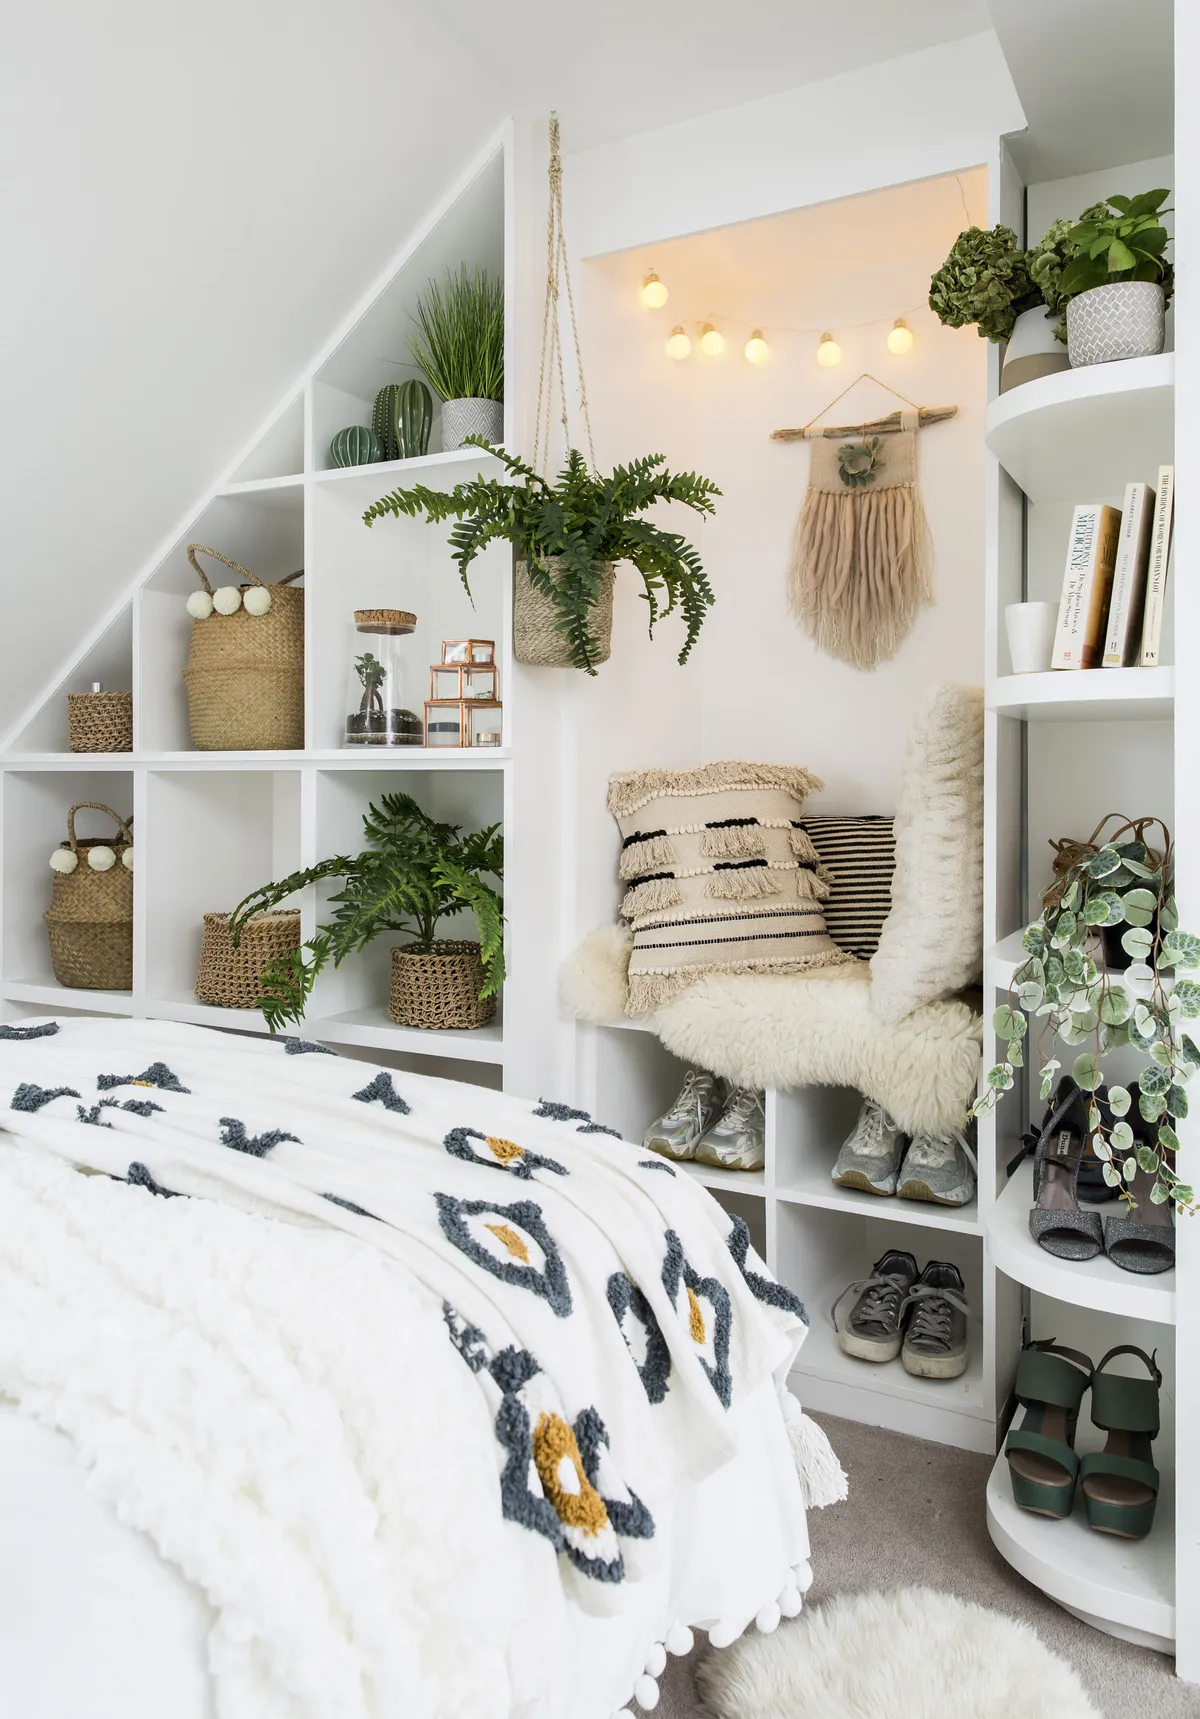 Bedroom makeover: 'I turned my bedroom into a boho hideaway'